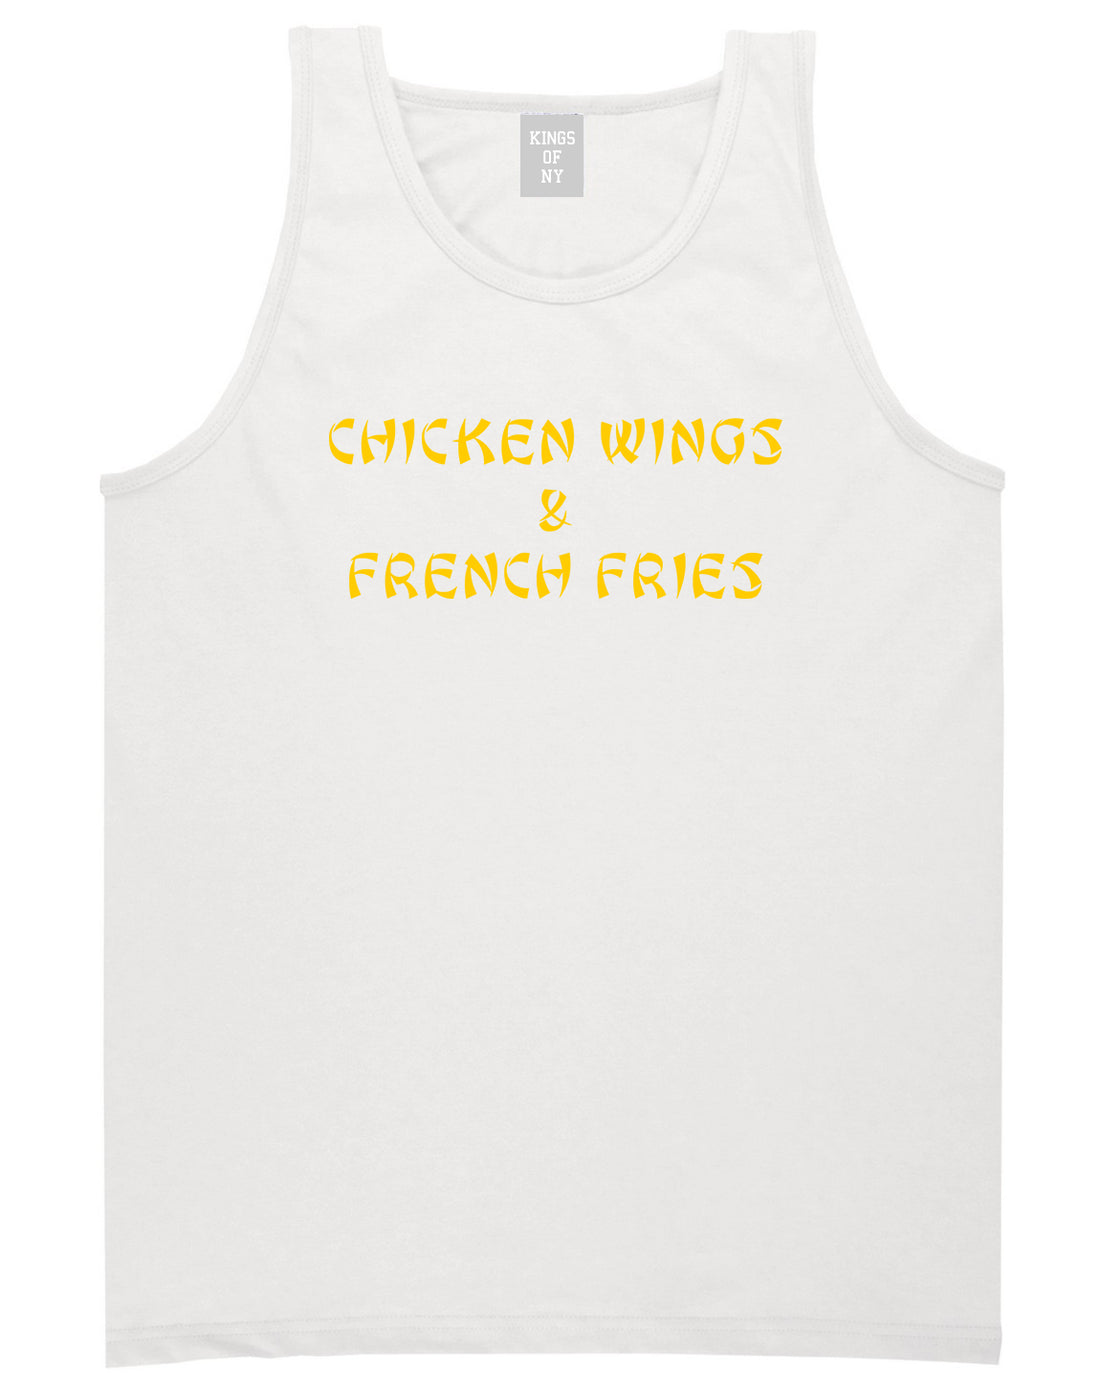 Chicken Wings And French Fries Tank Top Shirt in White